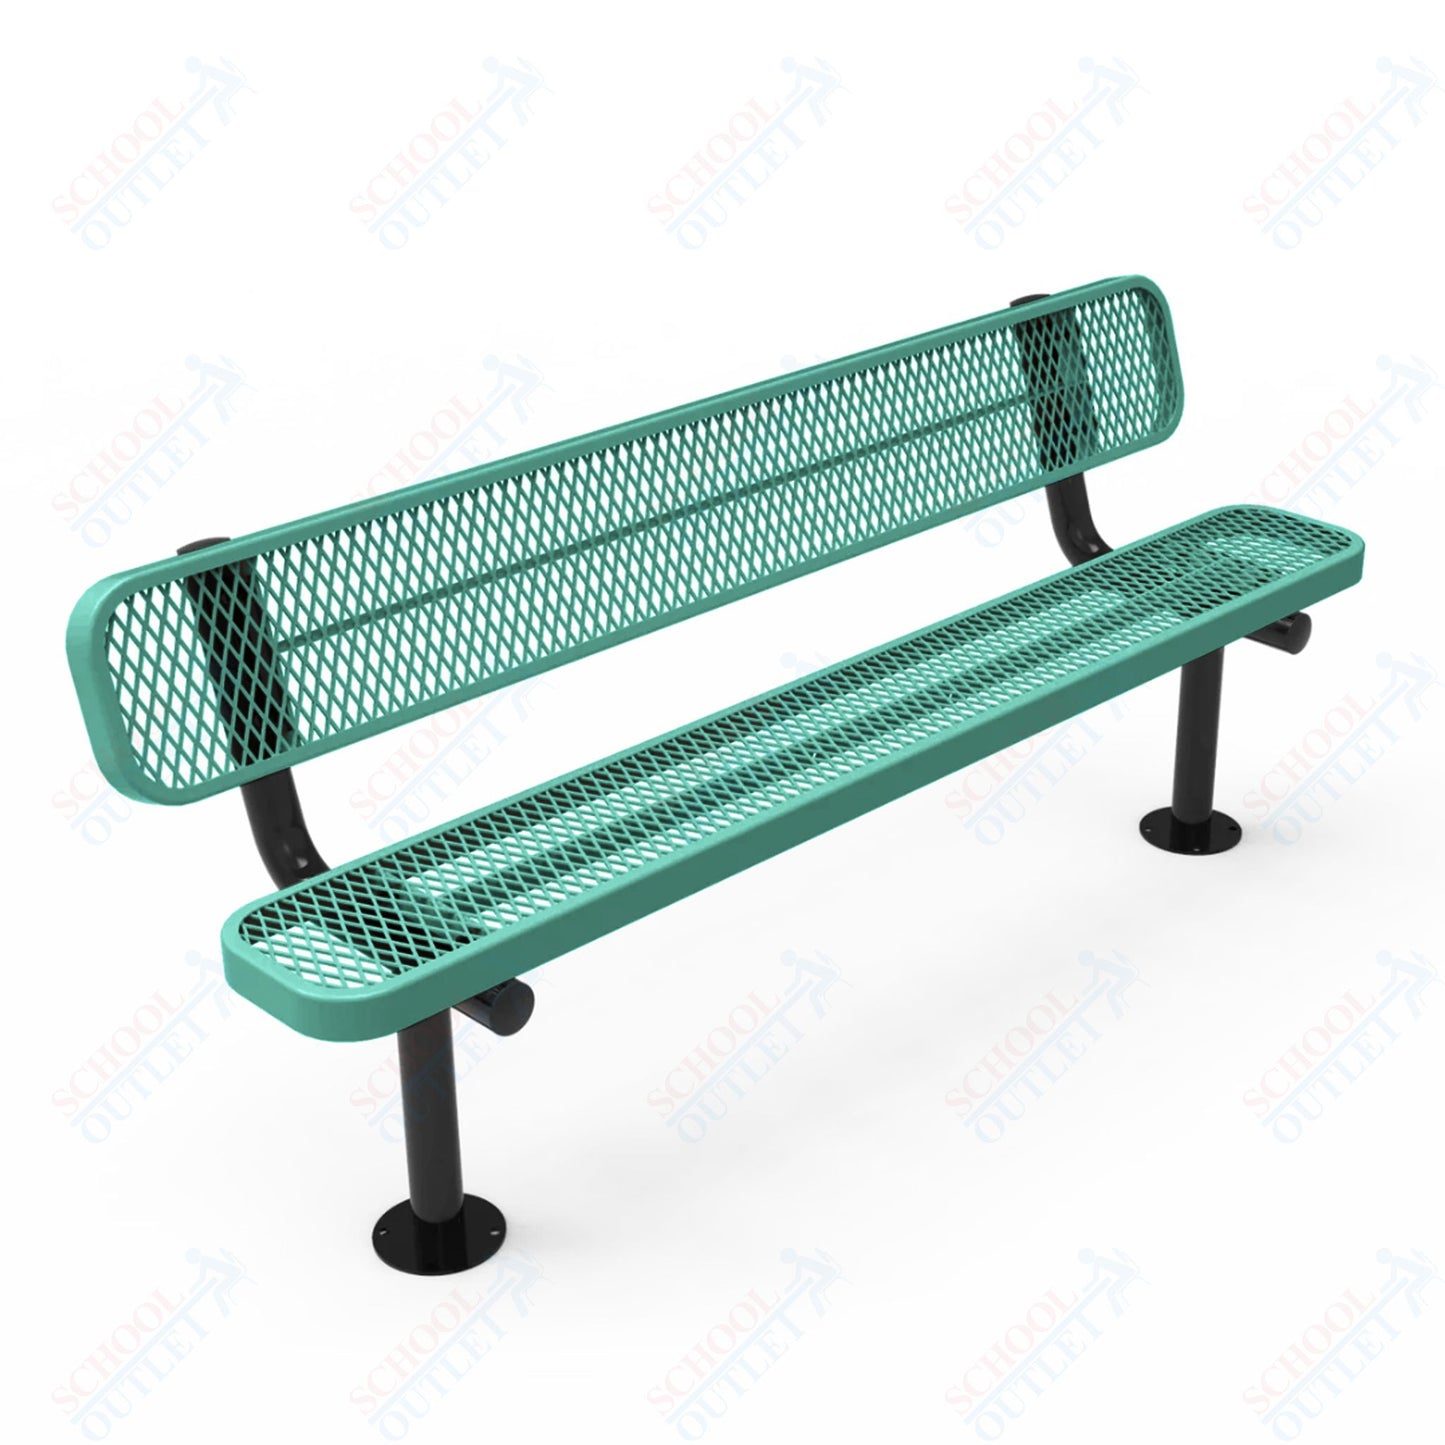 MyTcoat - Standard Outdoor Bench with Back - Surface Mount 4' L (MYT-BRT04-20)